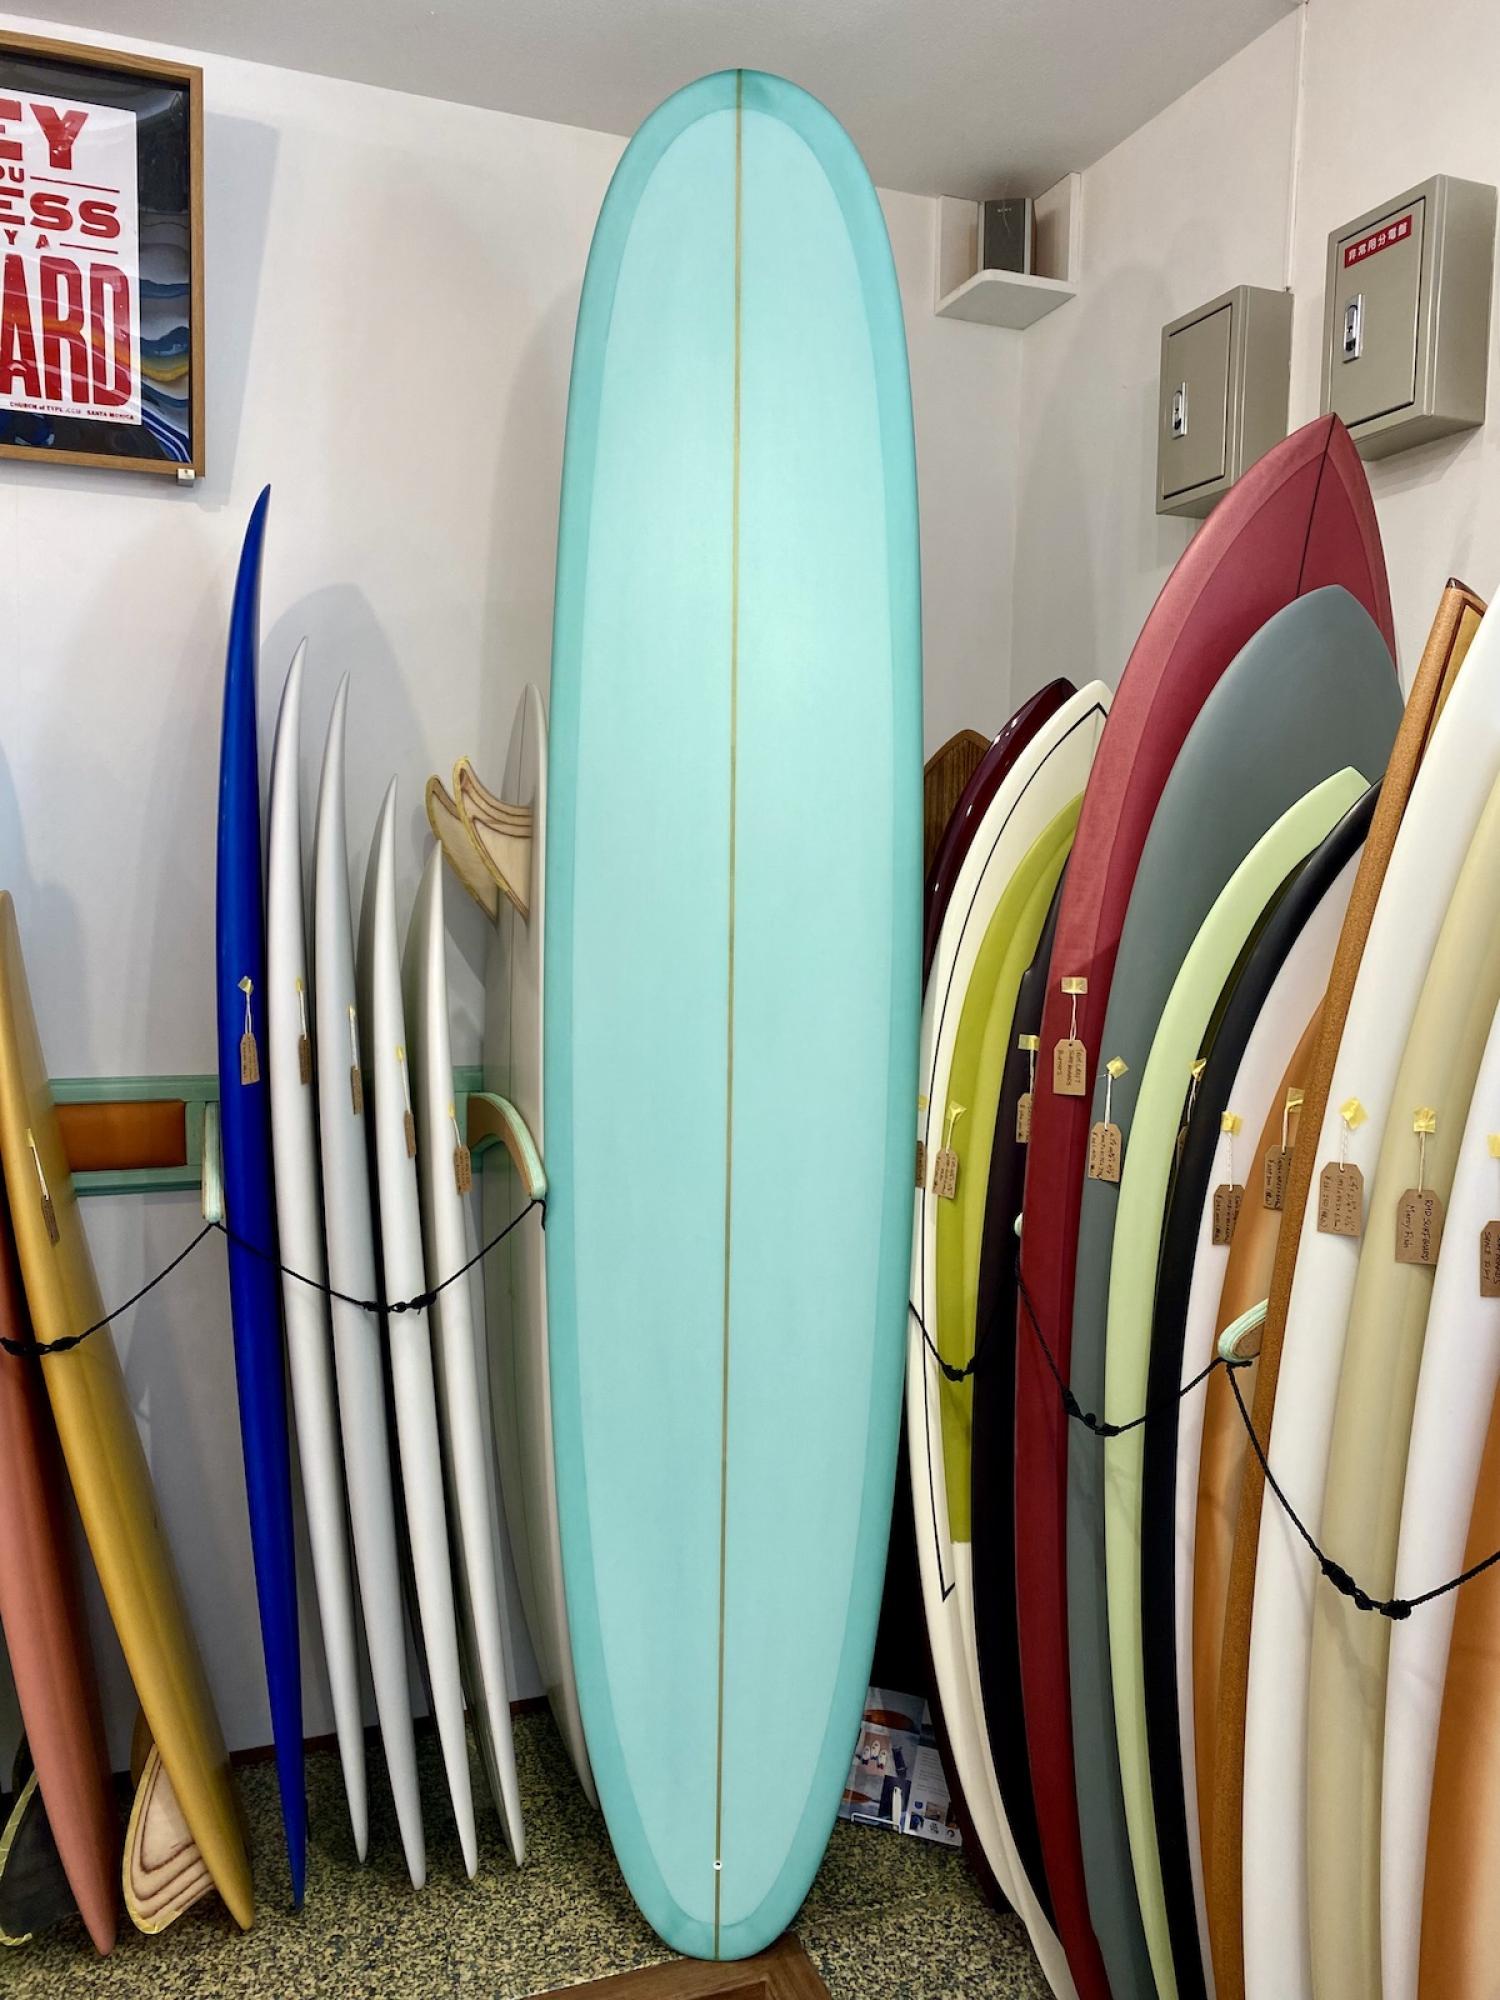 RMD SURFBOARD 9.0 Leopardã€€Scheduled to arrive in mid-April